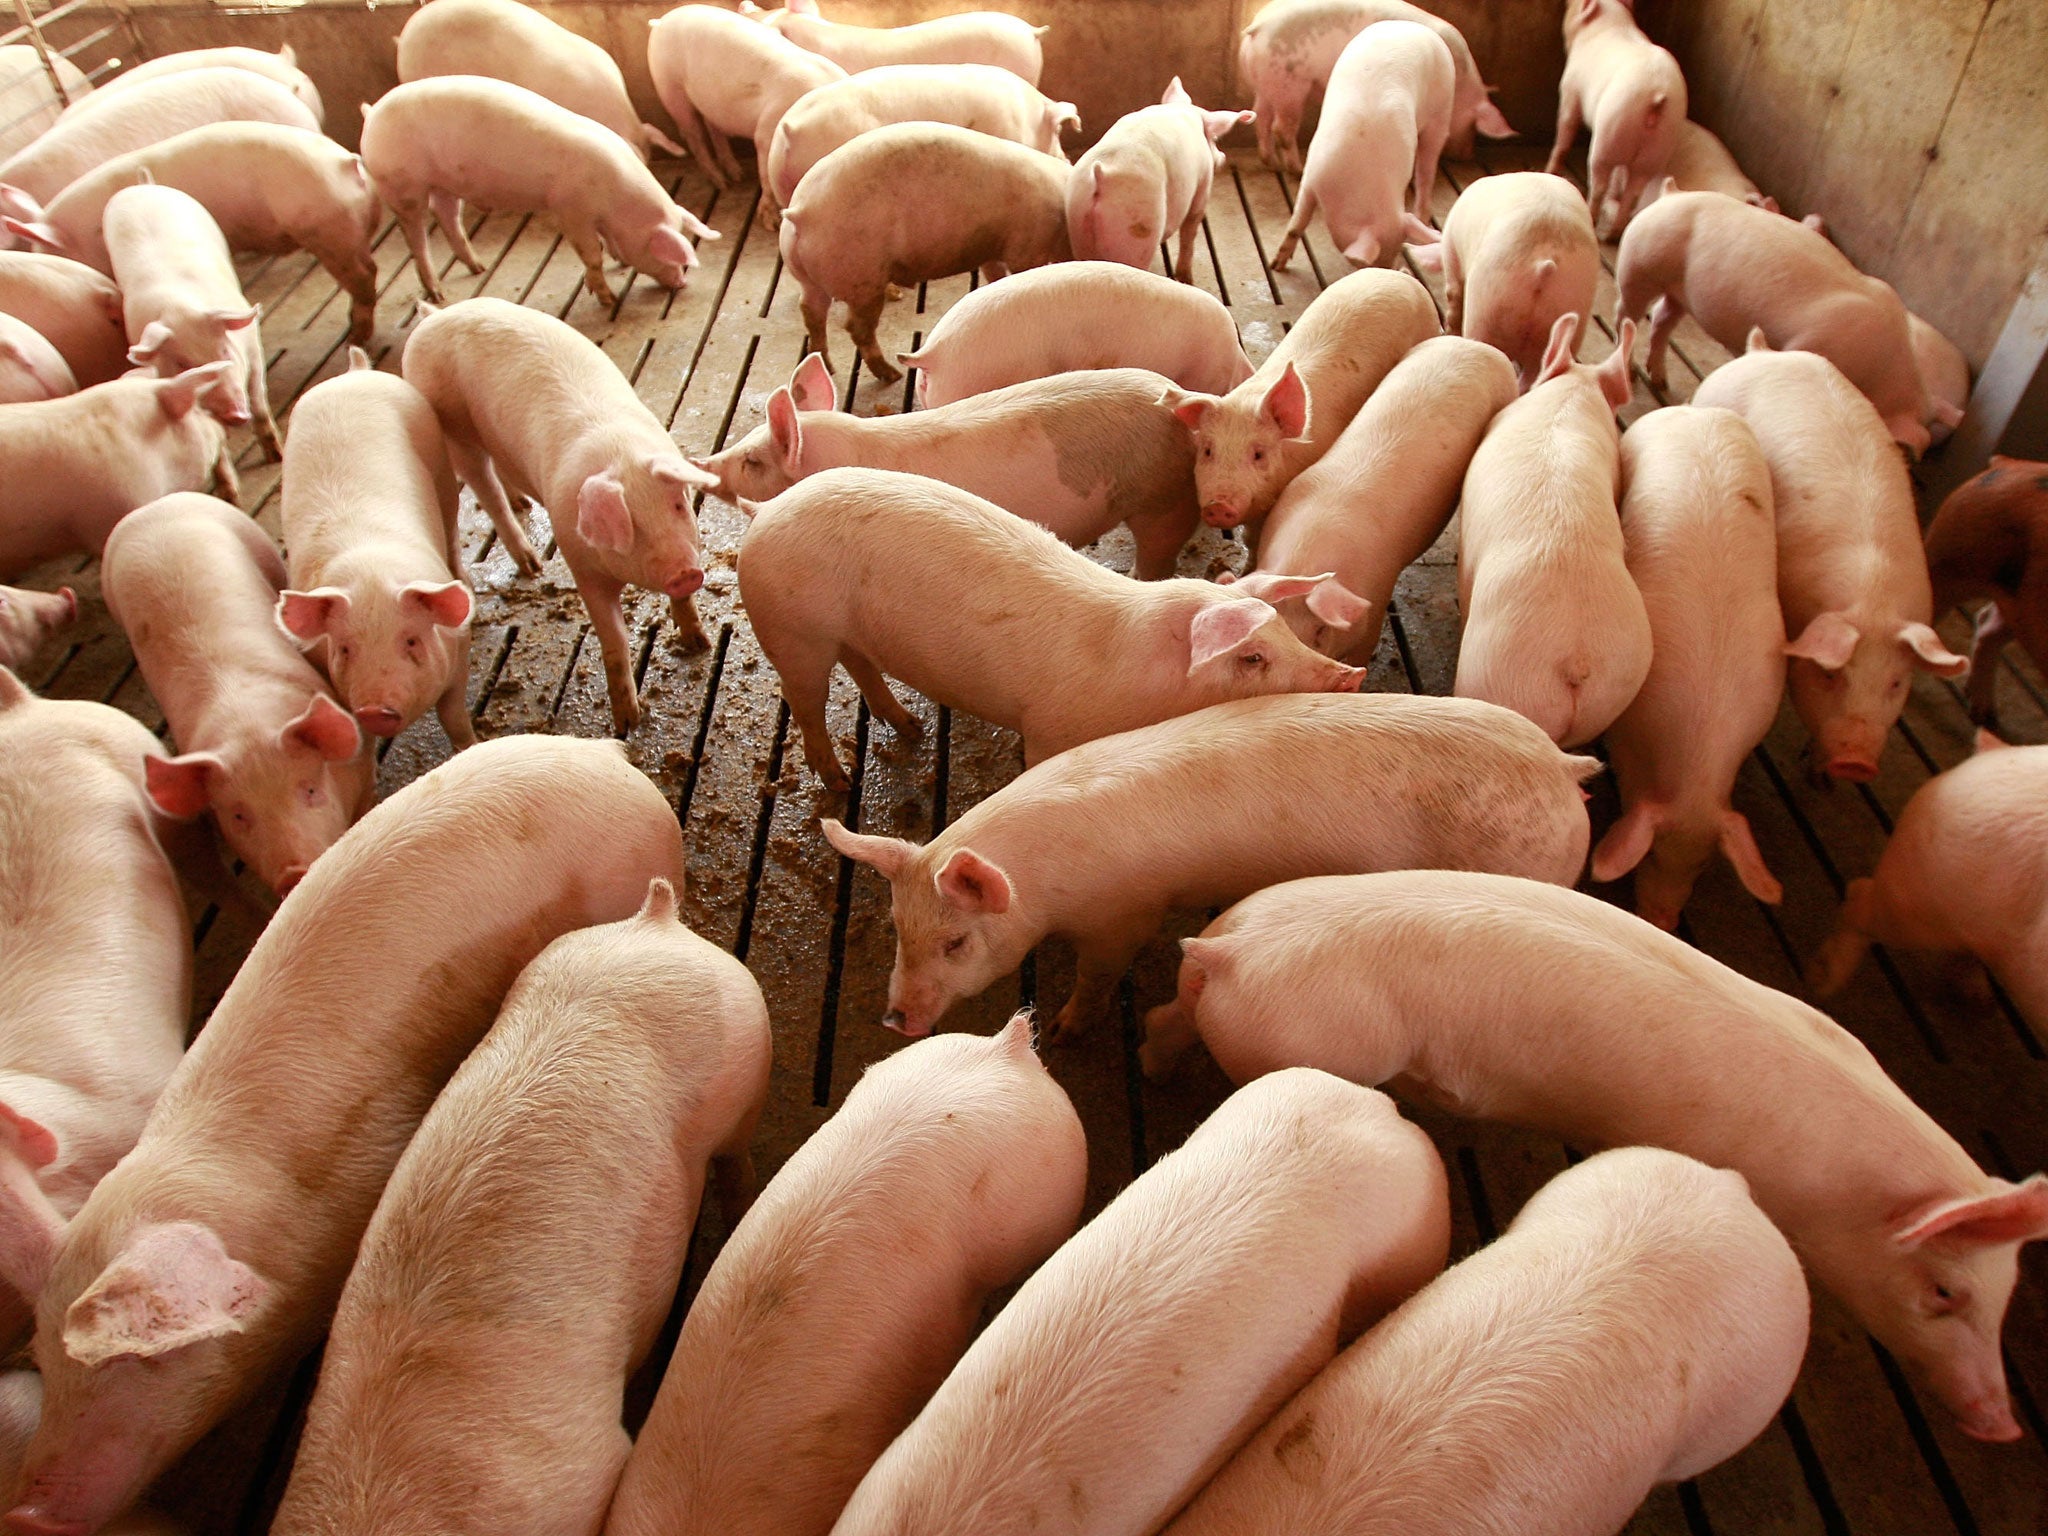 Some factory farms in the UK have been found to be breaking animal welfare promises.